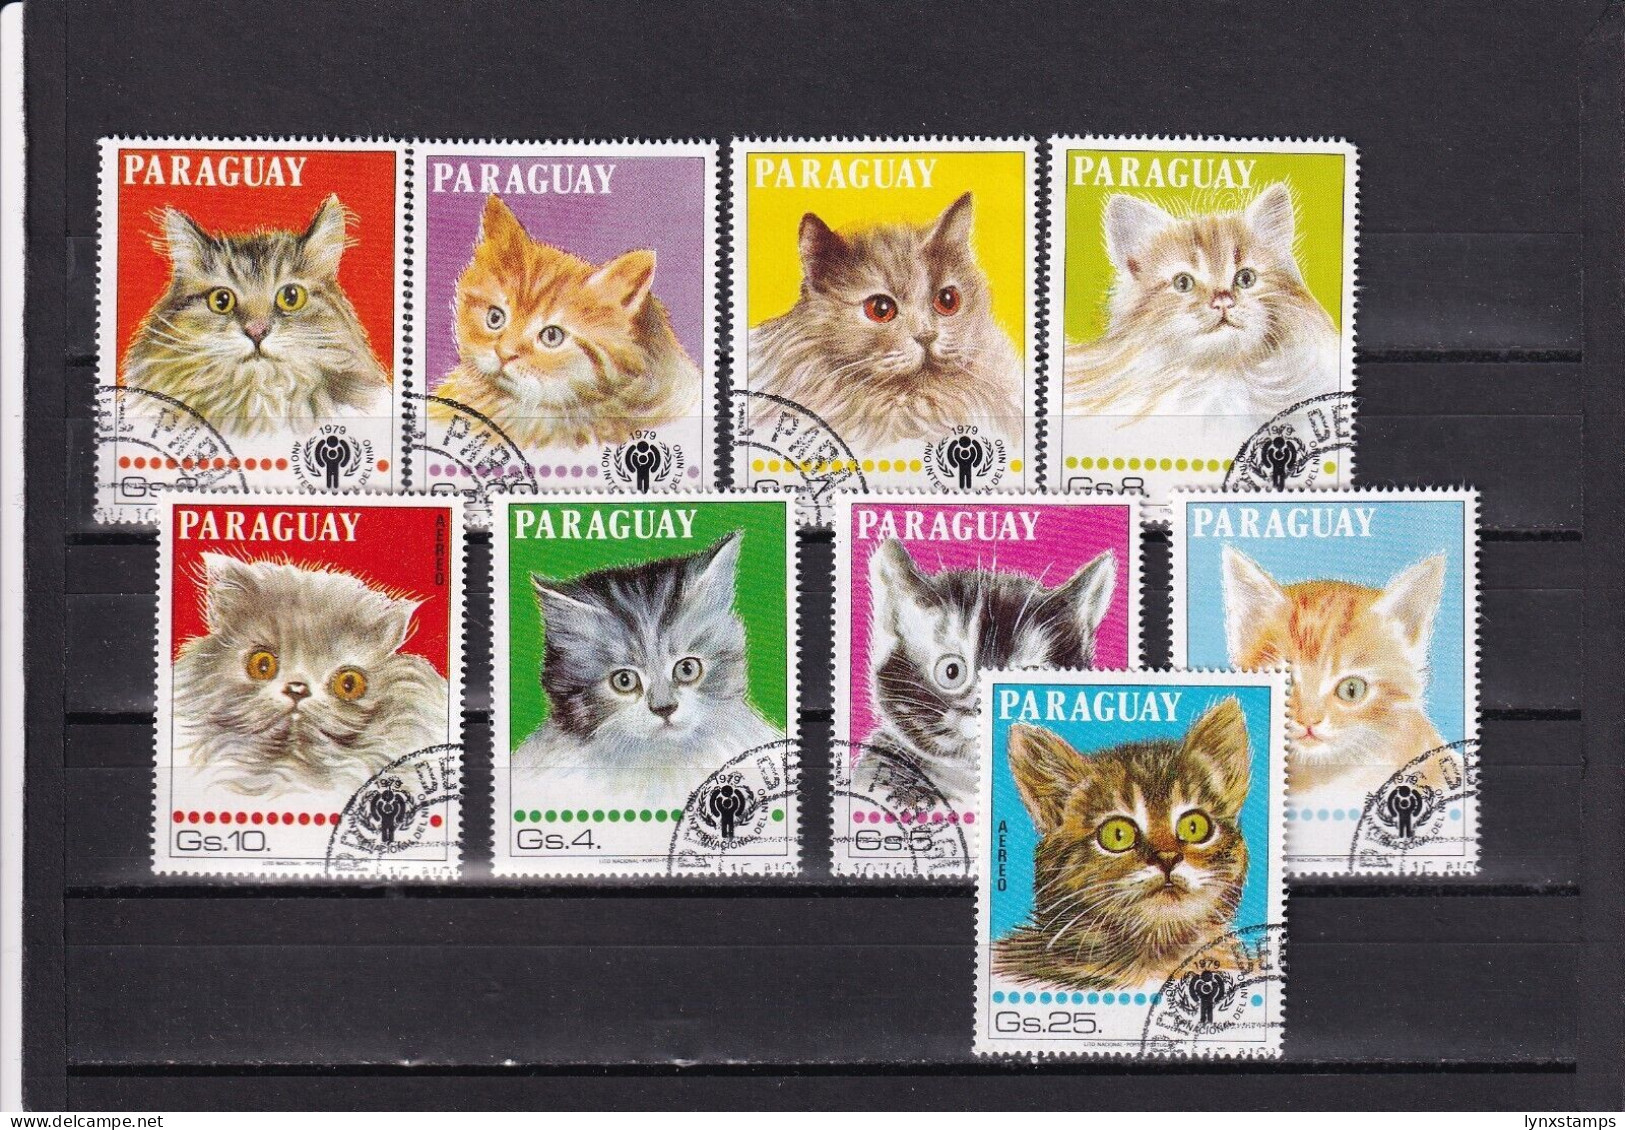 SA03 Paraguay 1979 International Year Of The Child Cats Postage Airmail Used - Paraguay